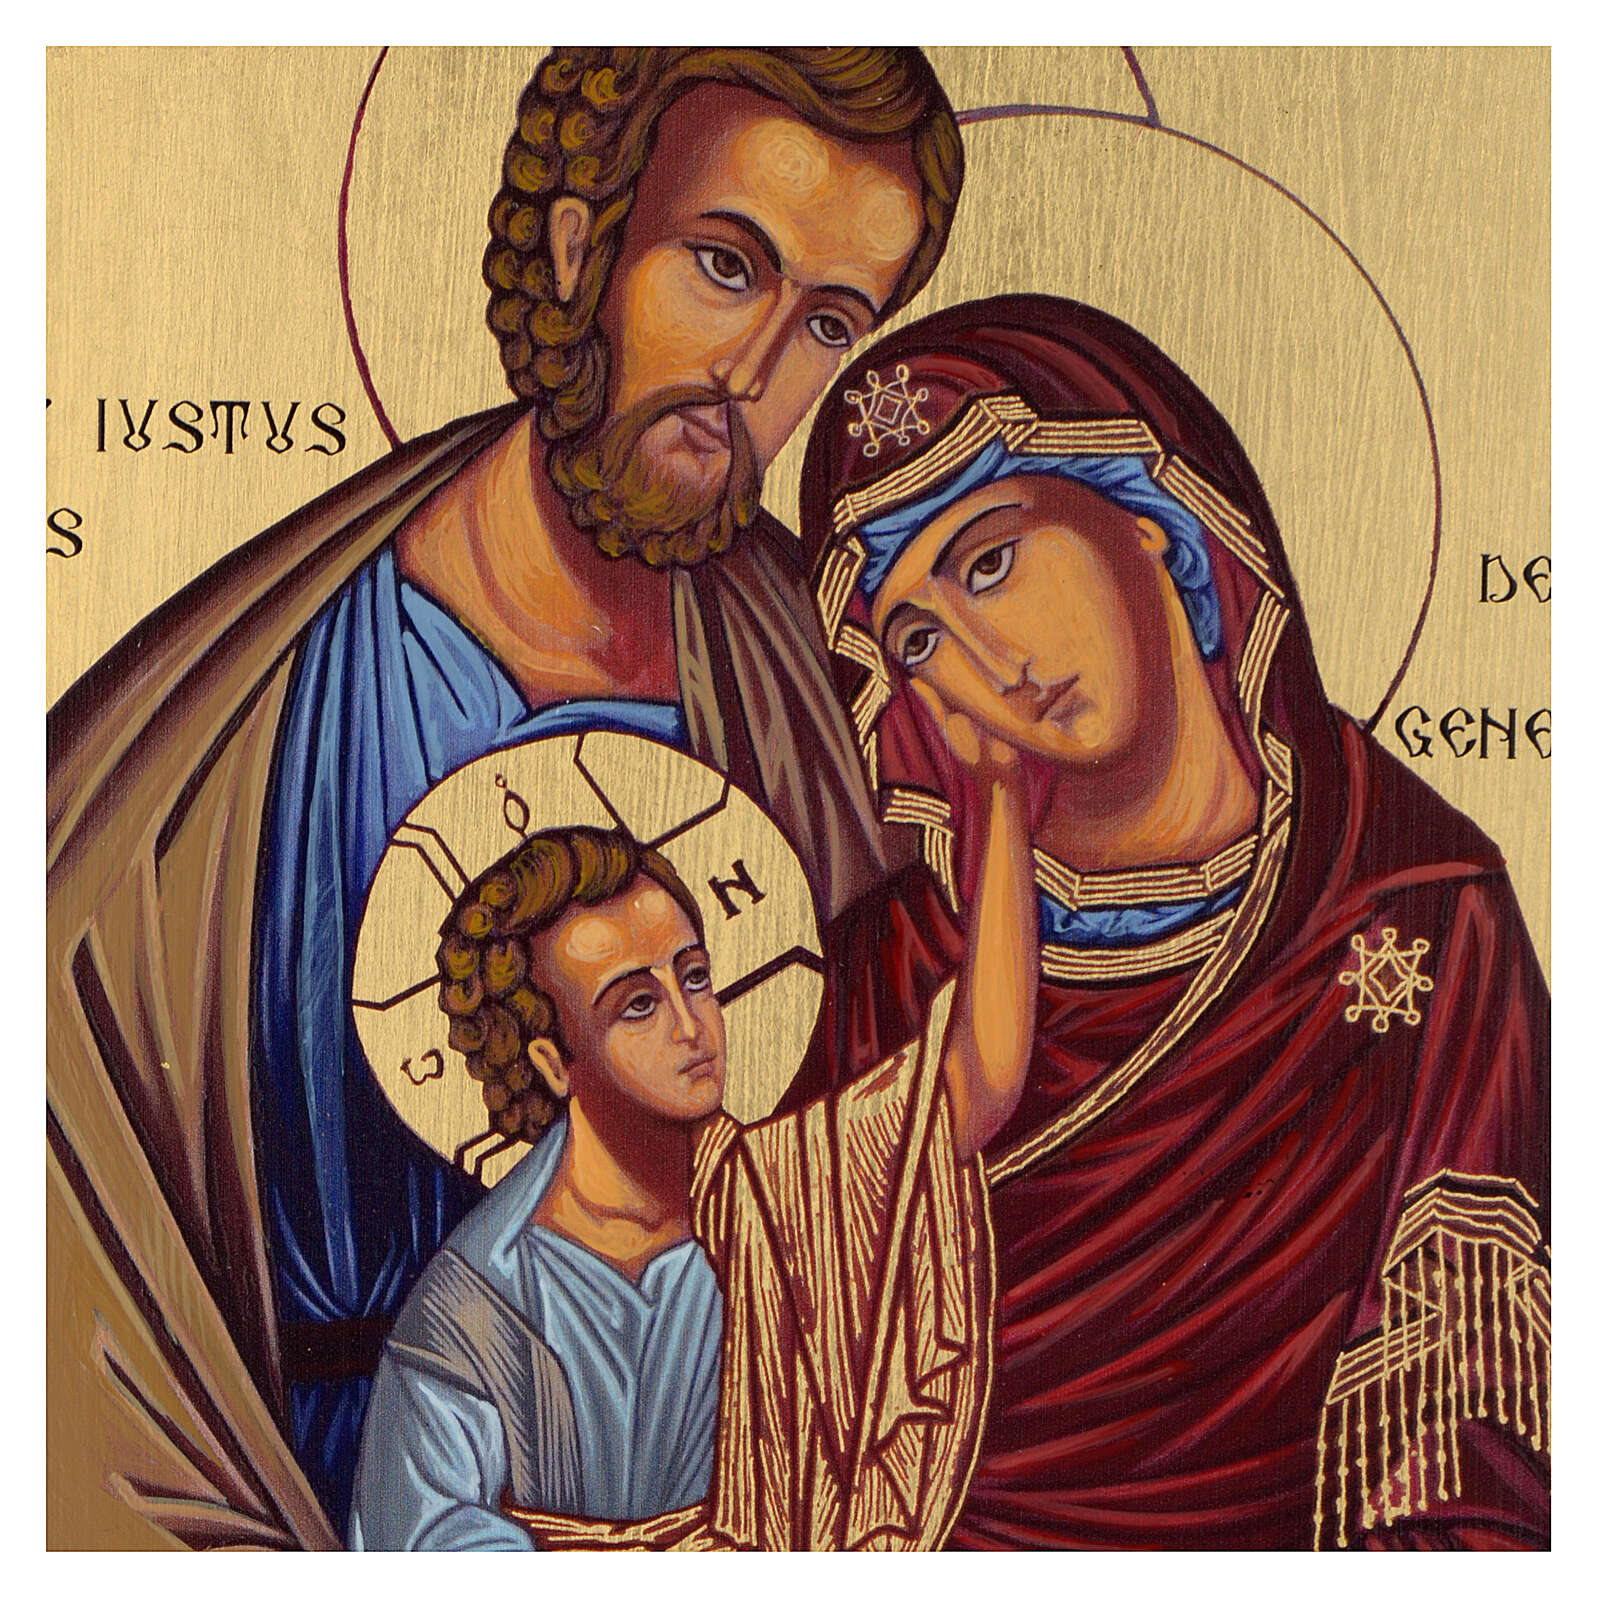 The Holy Family, John the Evangelist, and Christmas Out of the Ordinary